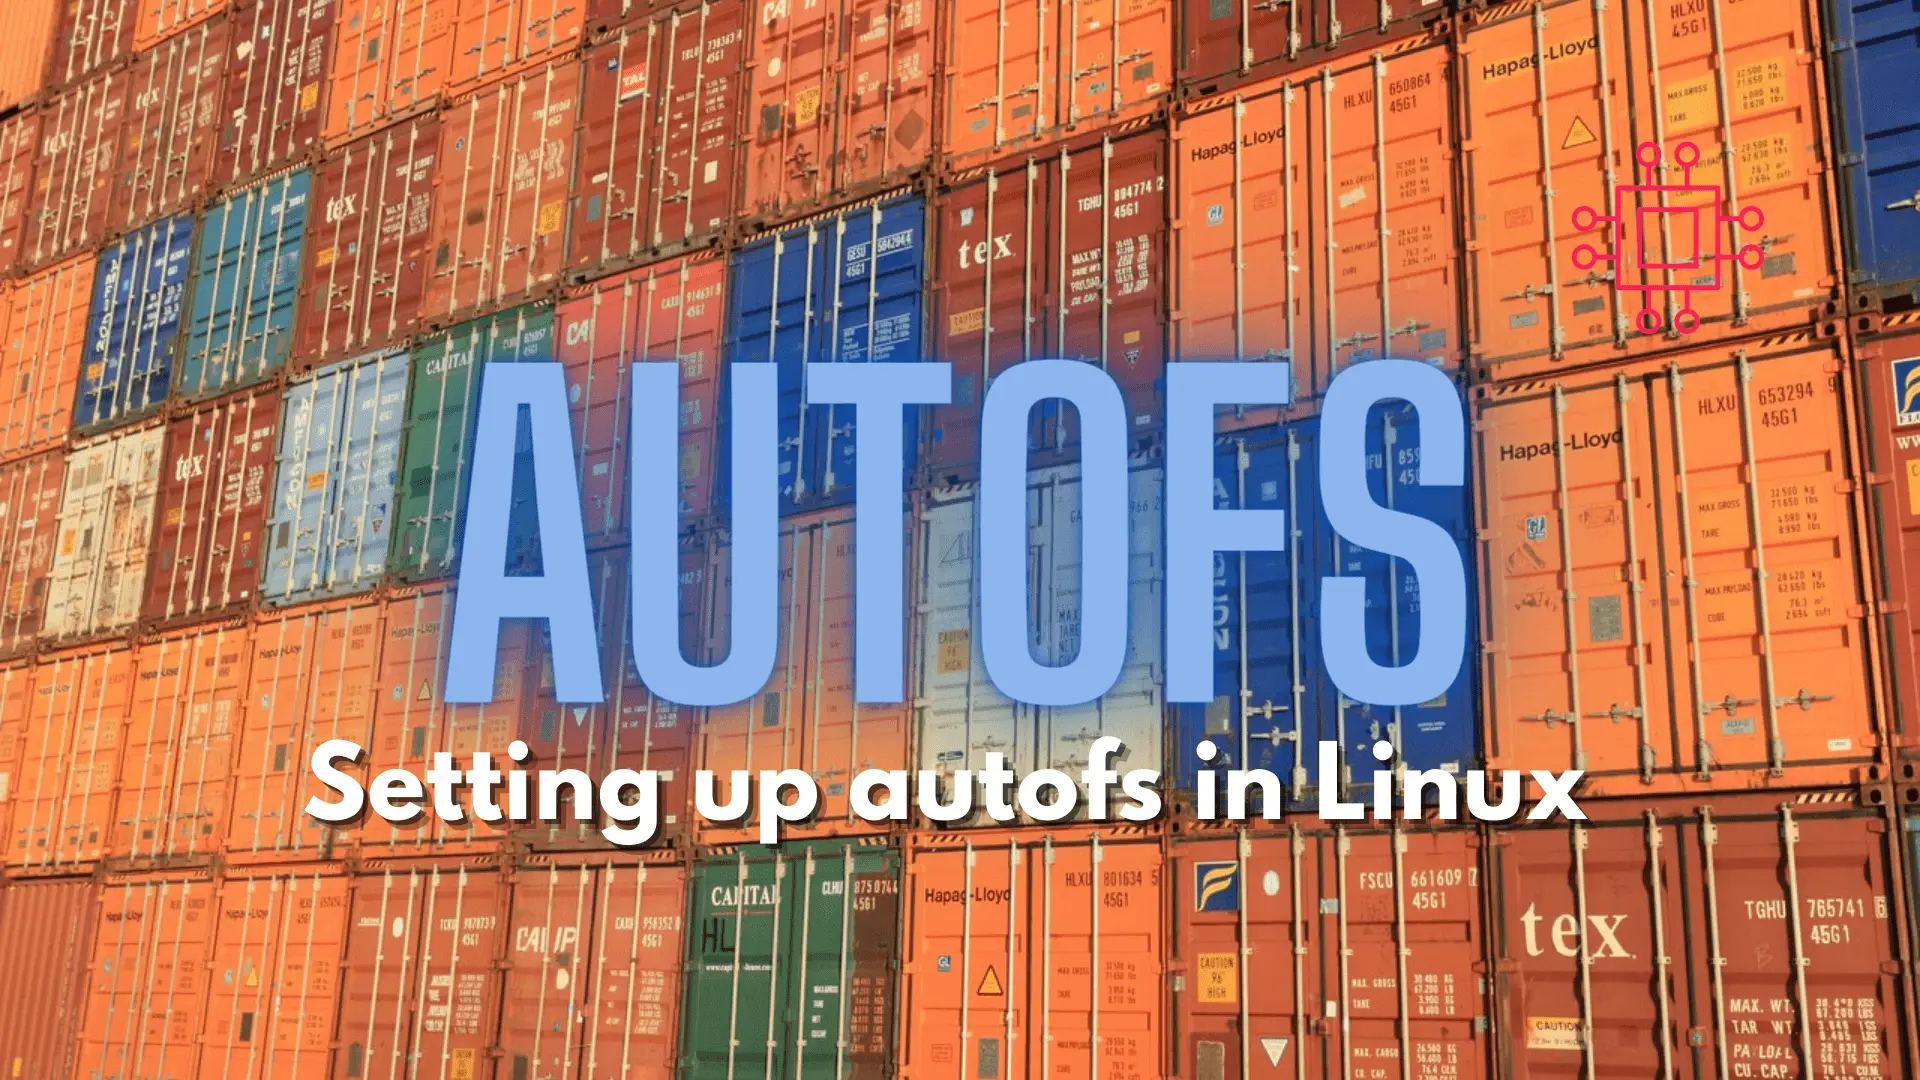 autofs in Linux